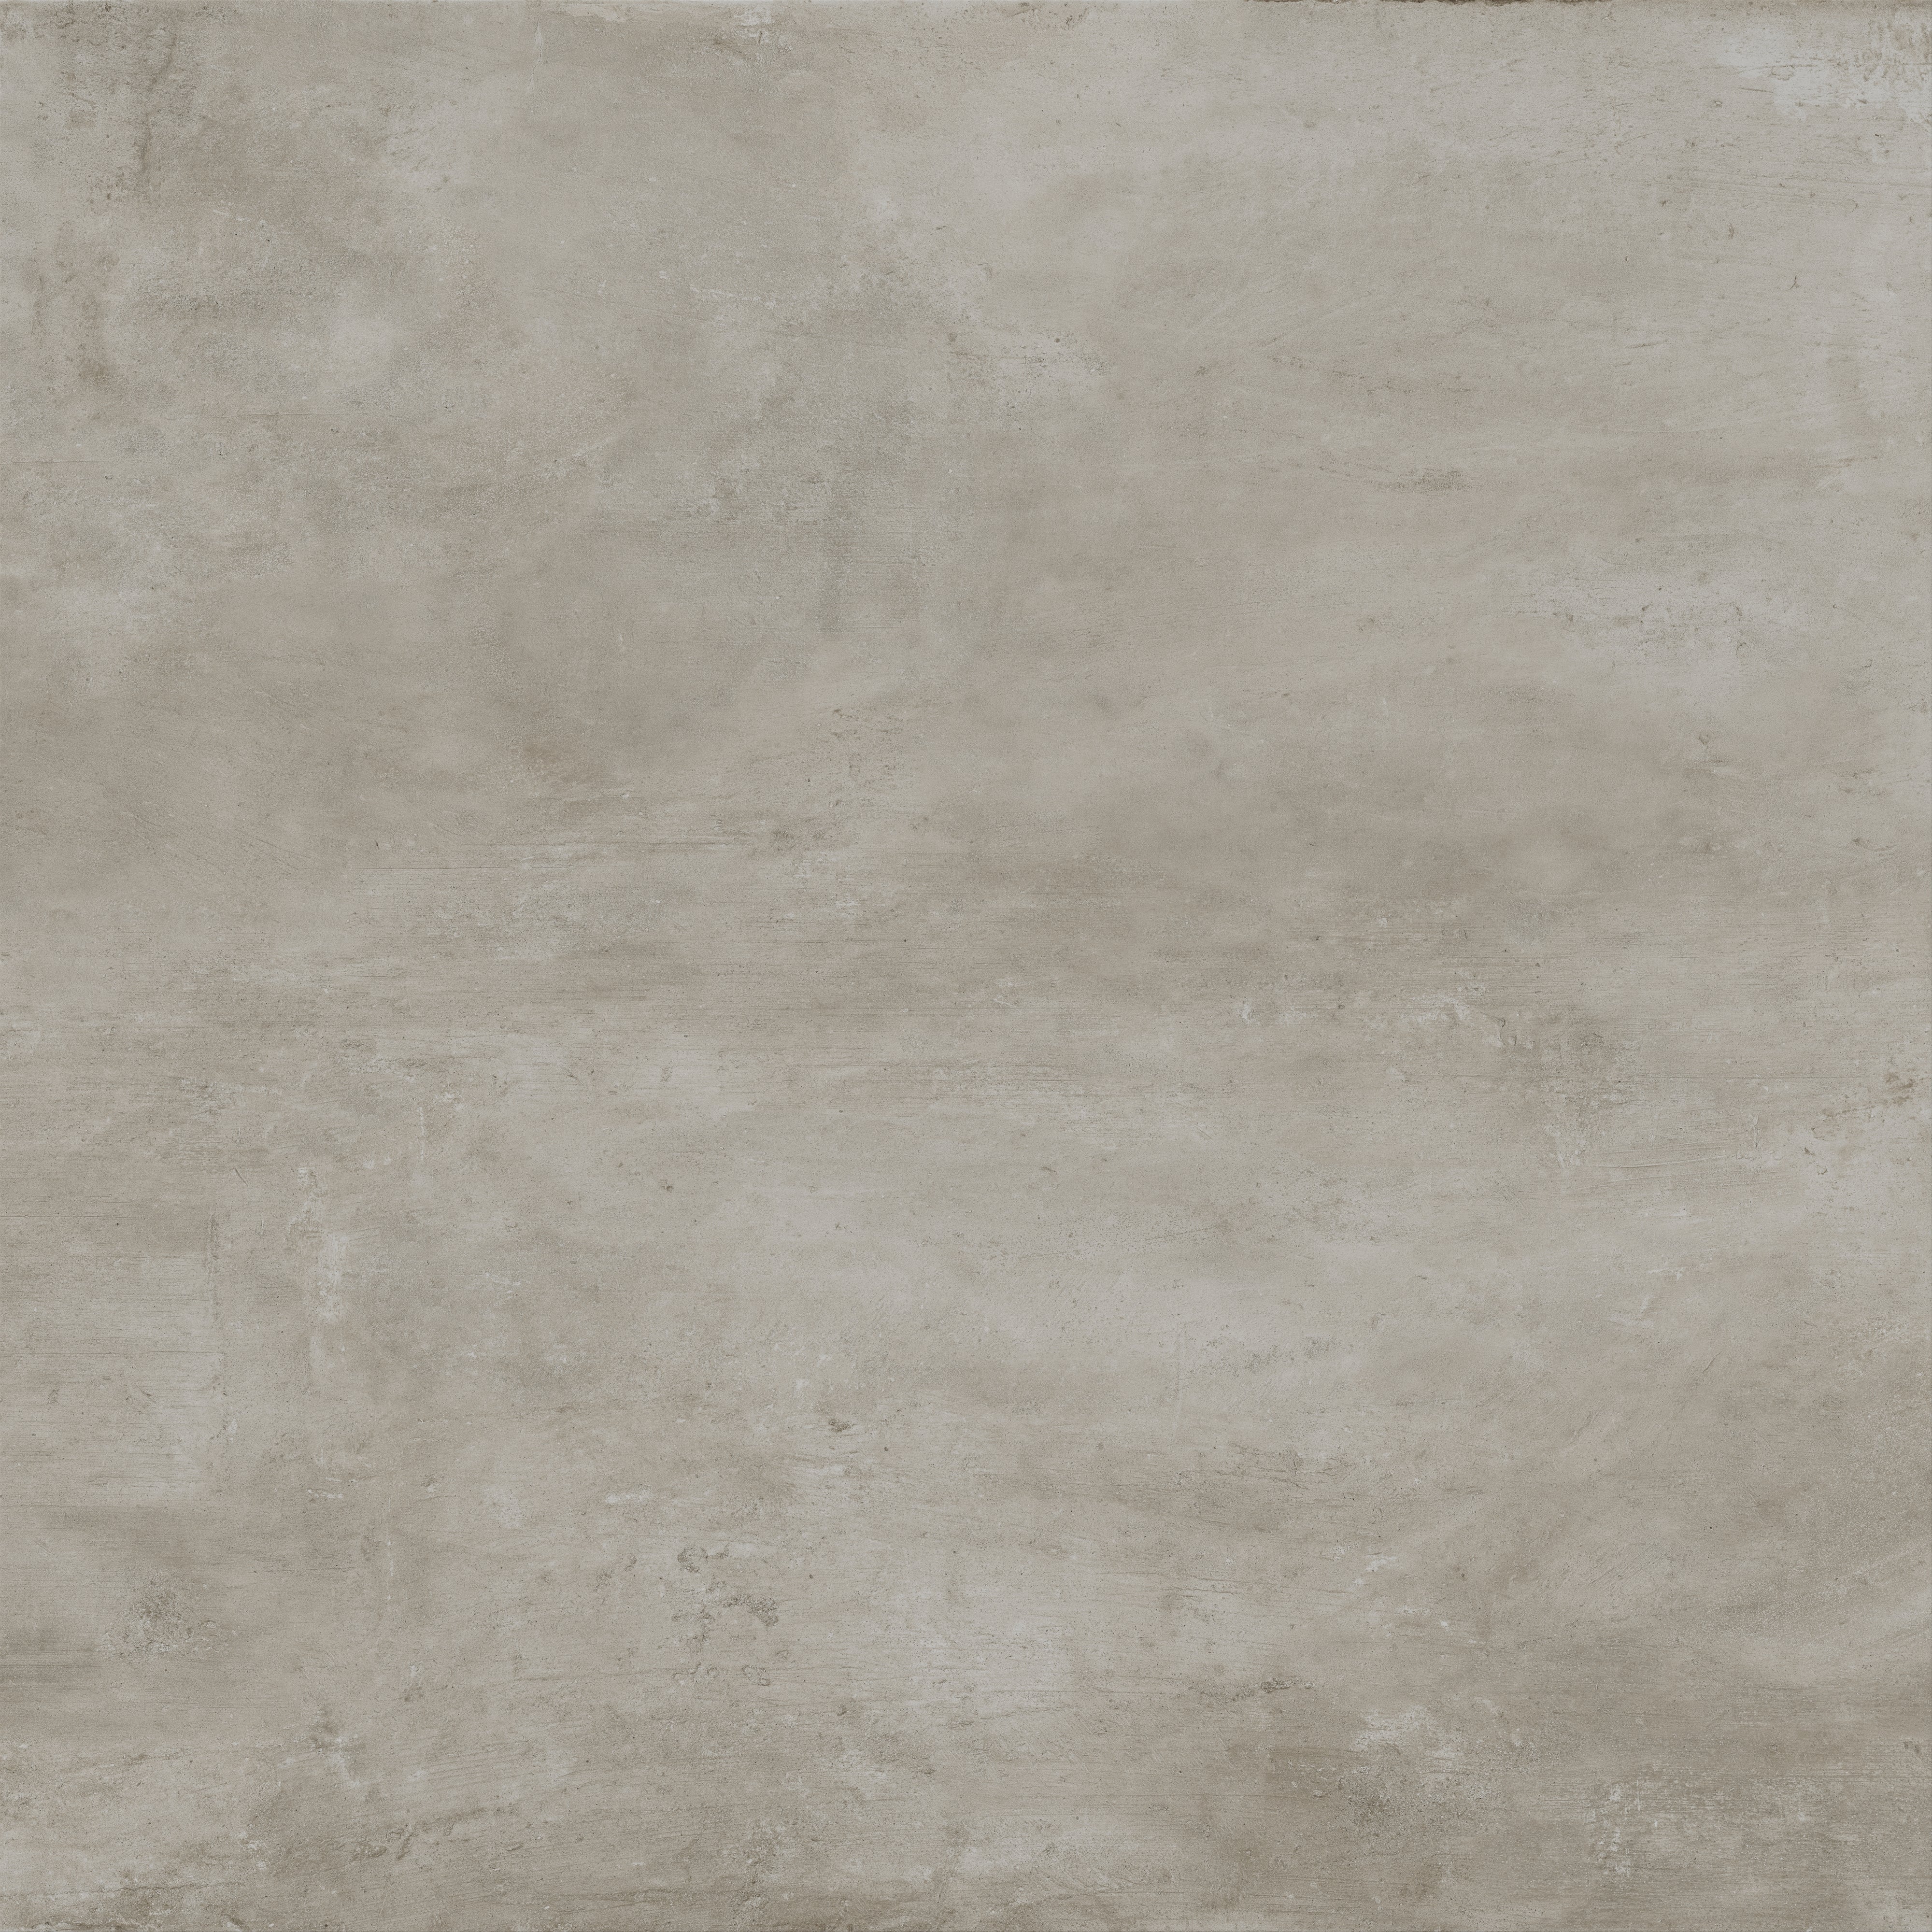 Ramsey 48x48 Matte Porcelain Tile in Putty